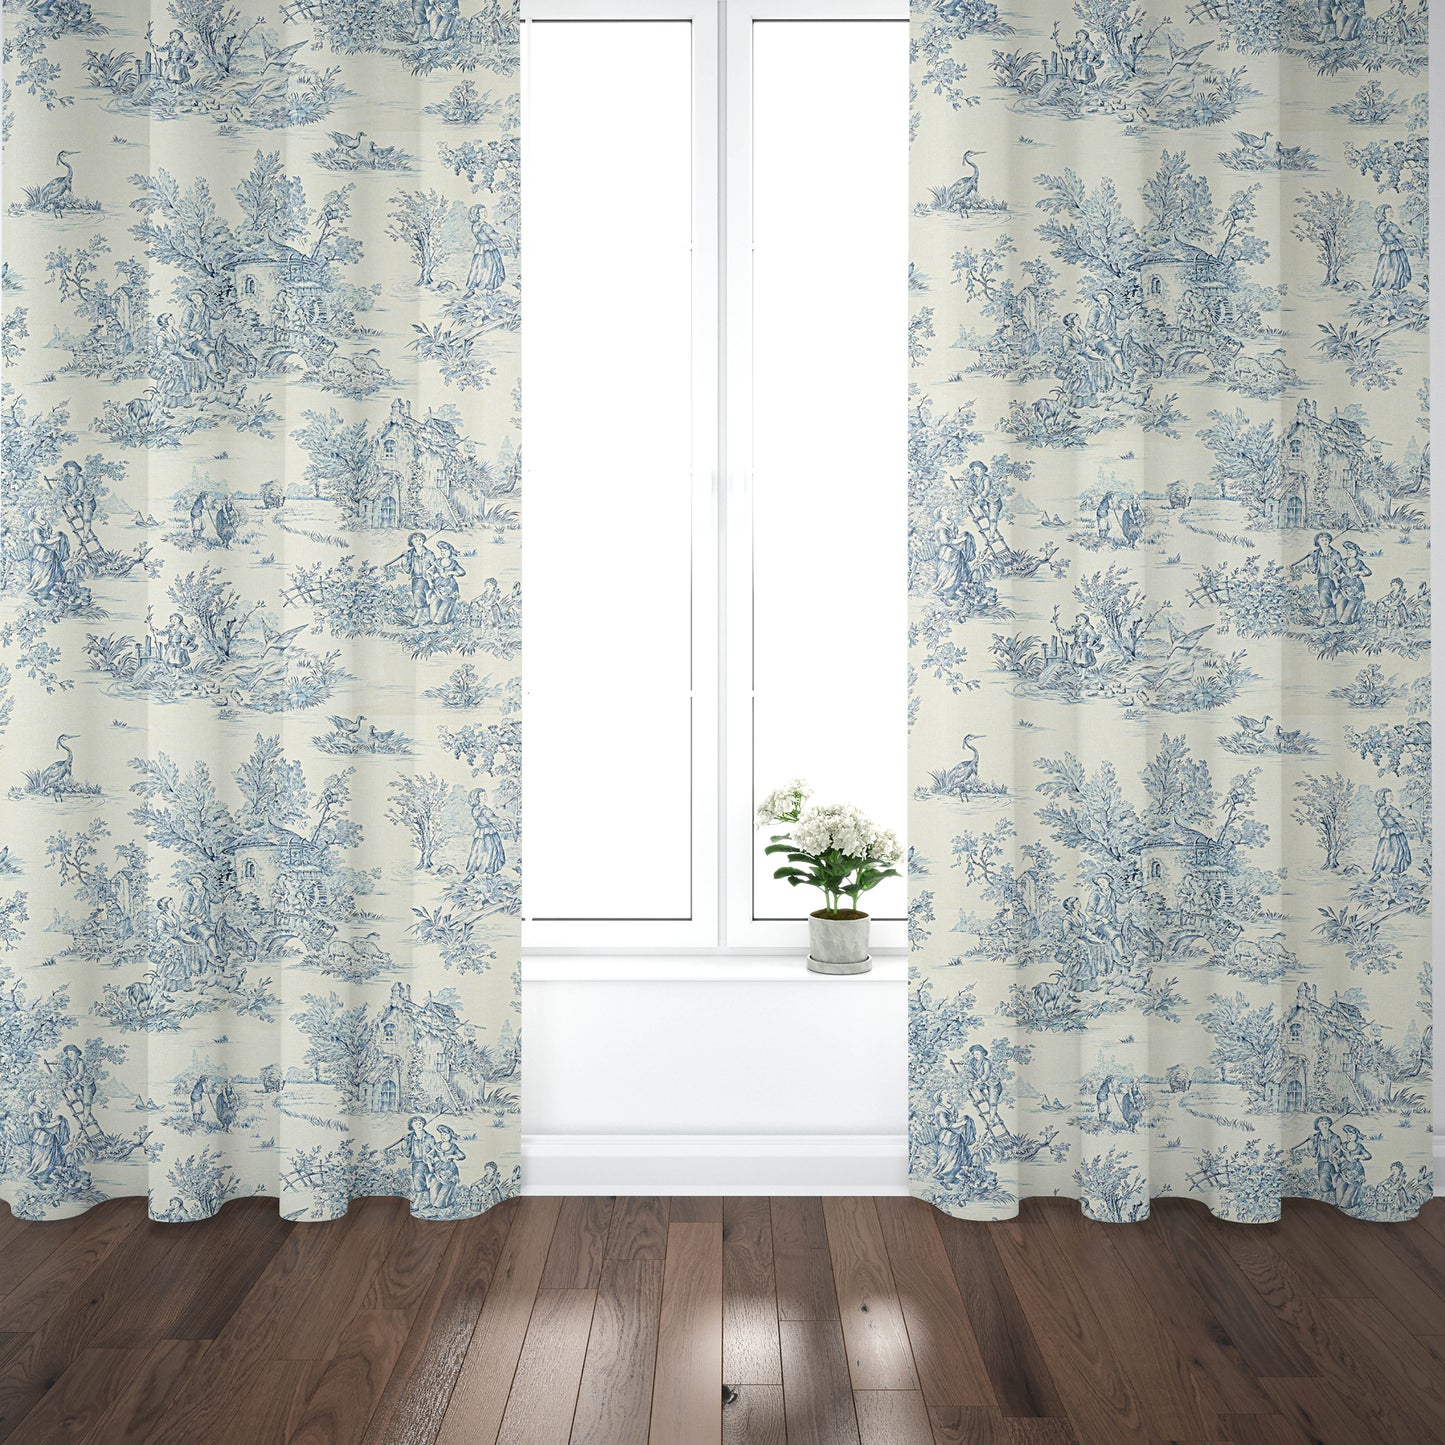 Pinch Pleated Curtain Panels Pair in Pastorale #2 Blue on Cream French Country Toile